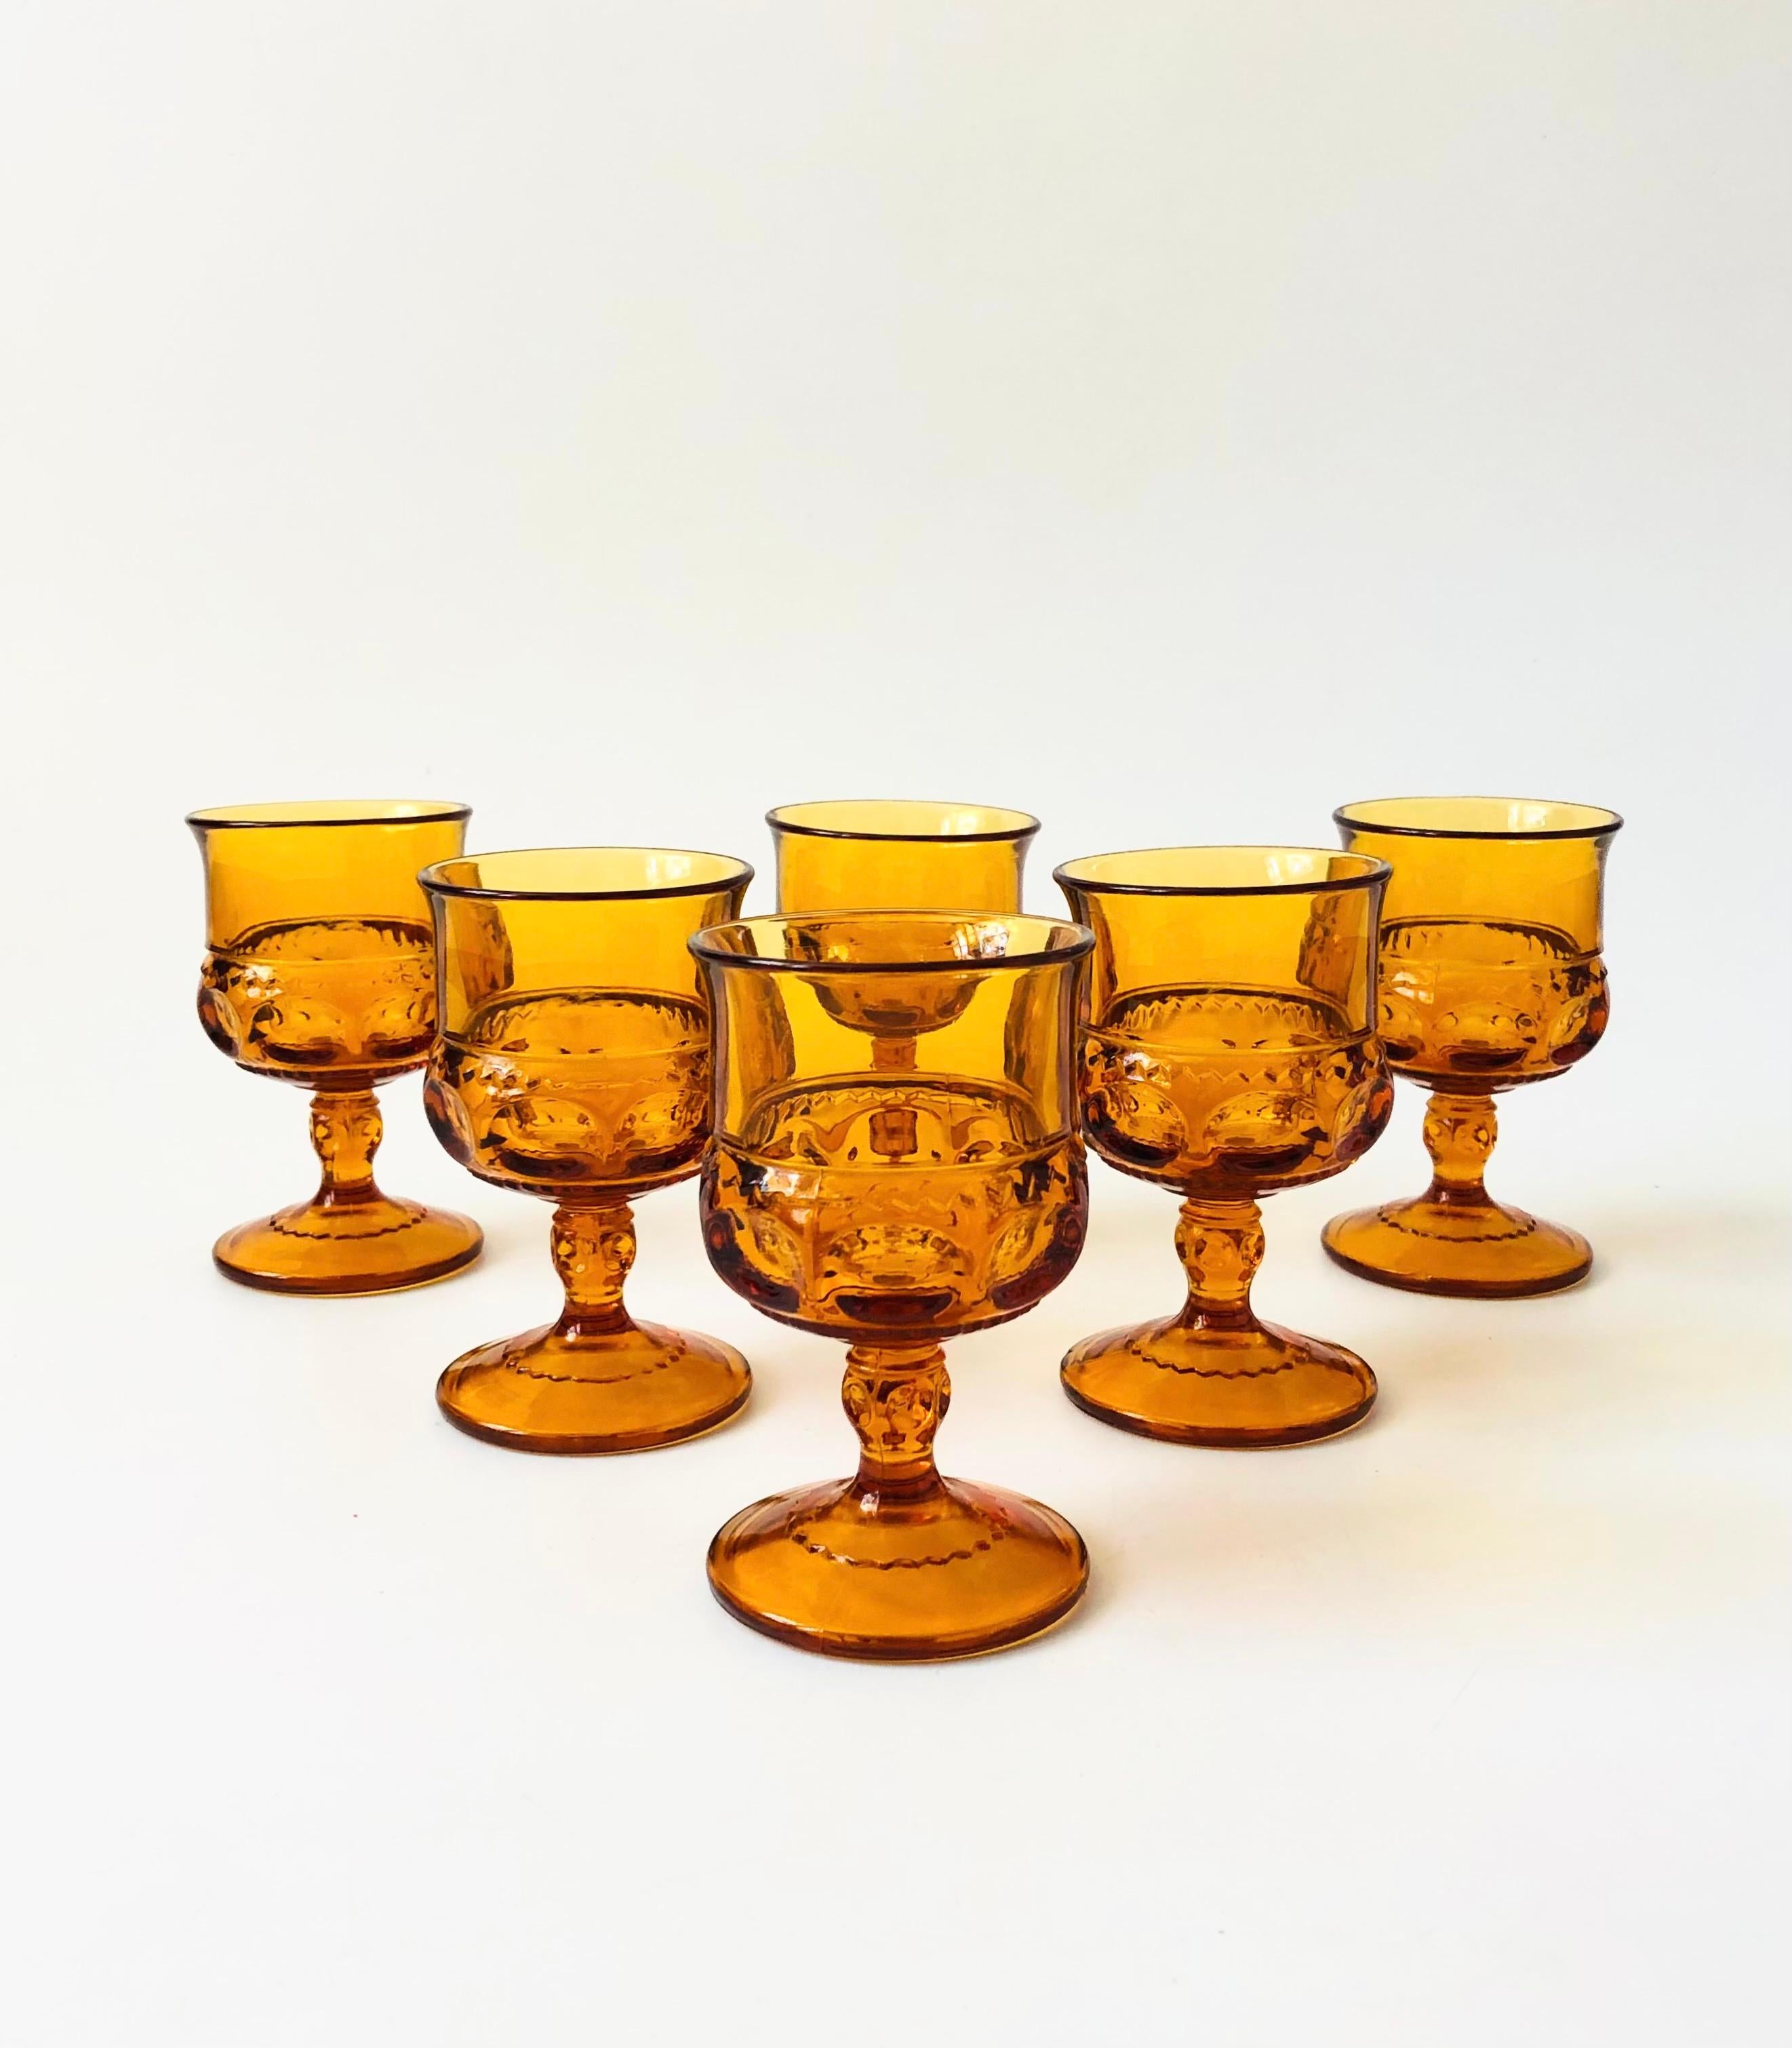 A set of 6 vintage goblets in an ornate design in amber colored glass. Made in the King's Crown pattern by Indiana Glass. Perfect for a small glass of wine or champagne.

